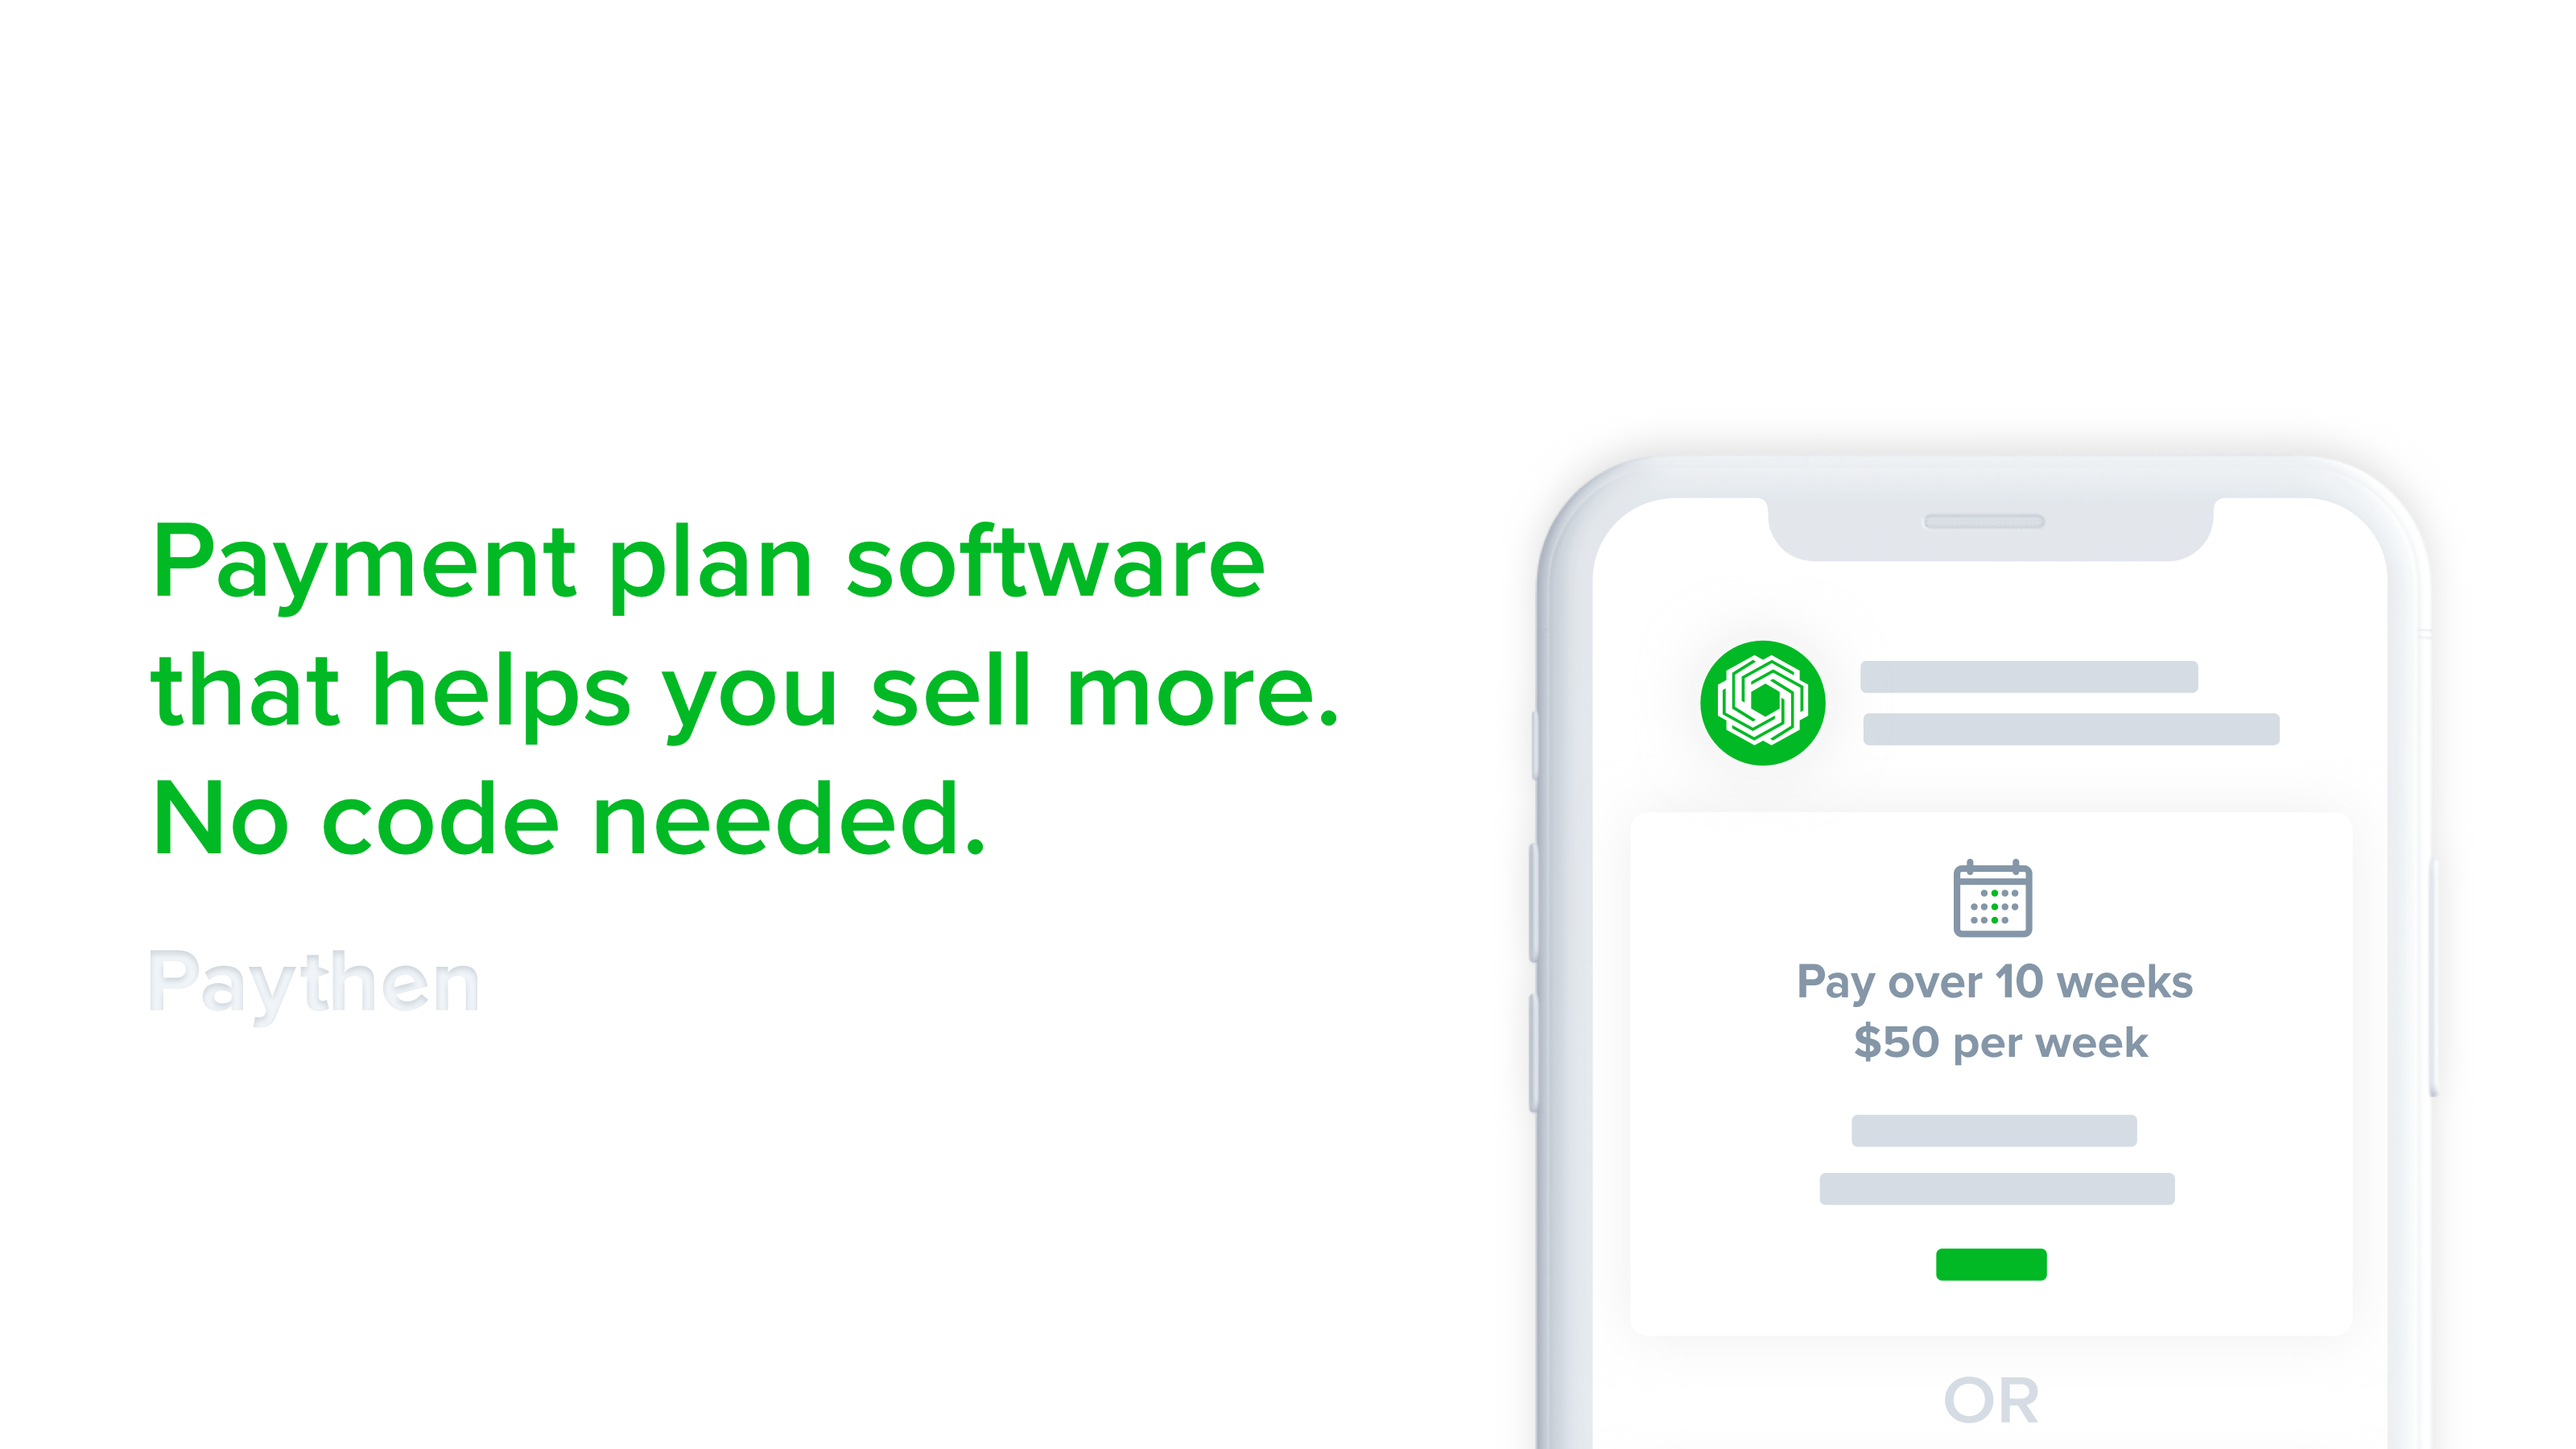 Offer payment plans in minutes, with no code or technical know-how